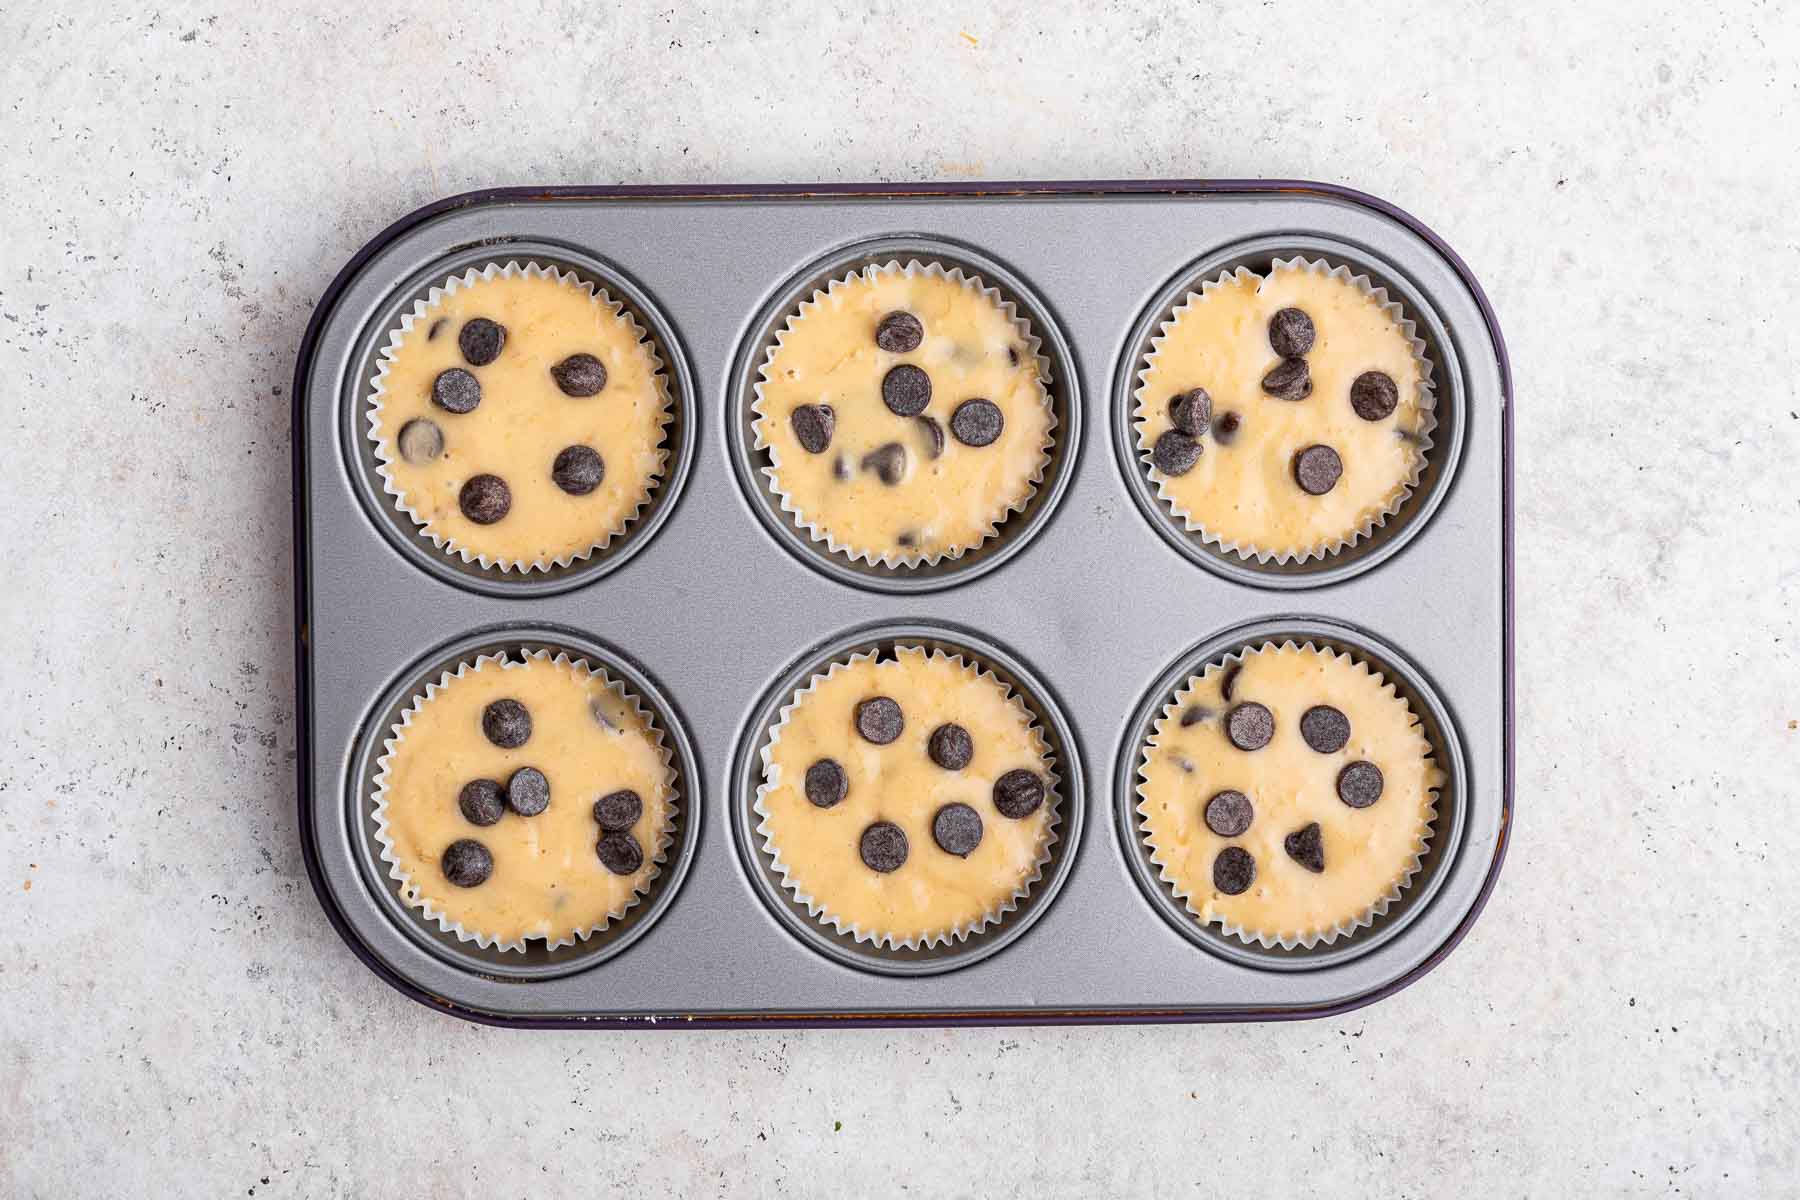 Six unbaked yellow muffins with chocolate chips sprinkled on top.